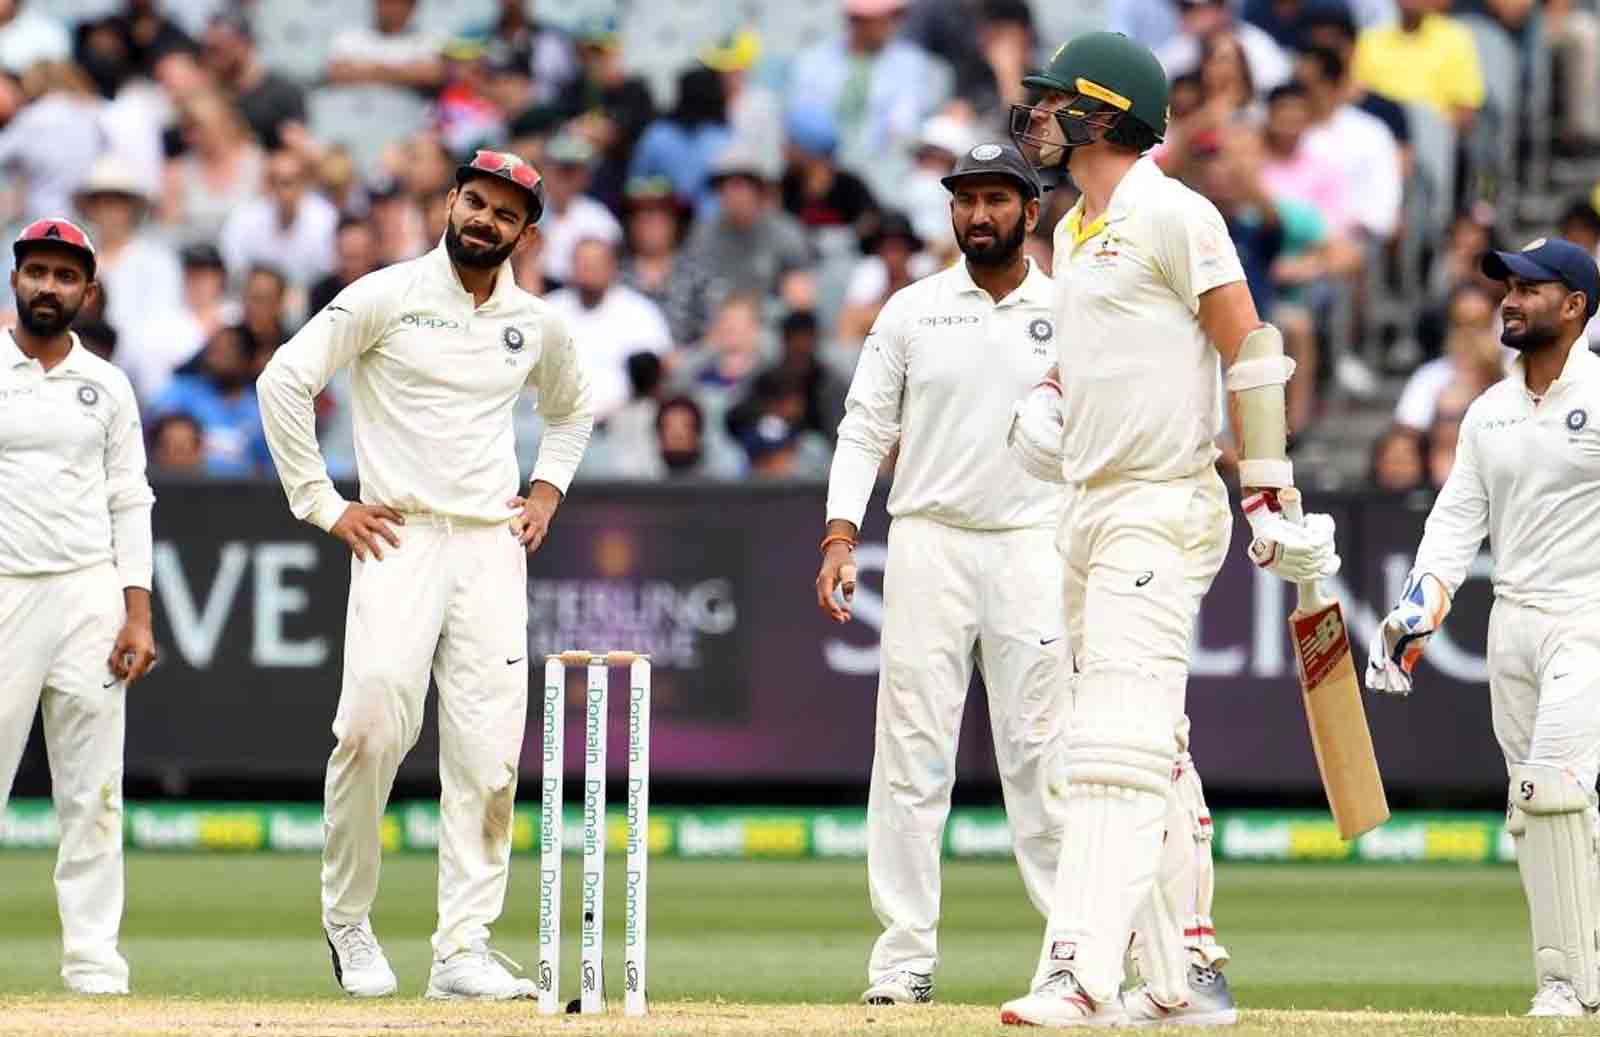 India vs Australia: Boxing Day Test To Be Played in Melbourne, Check Full Tentative Tour Schedule